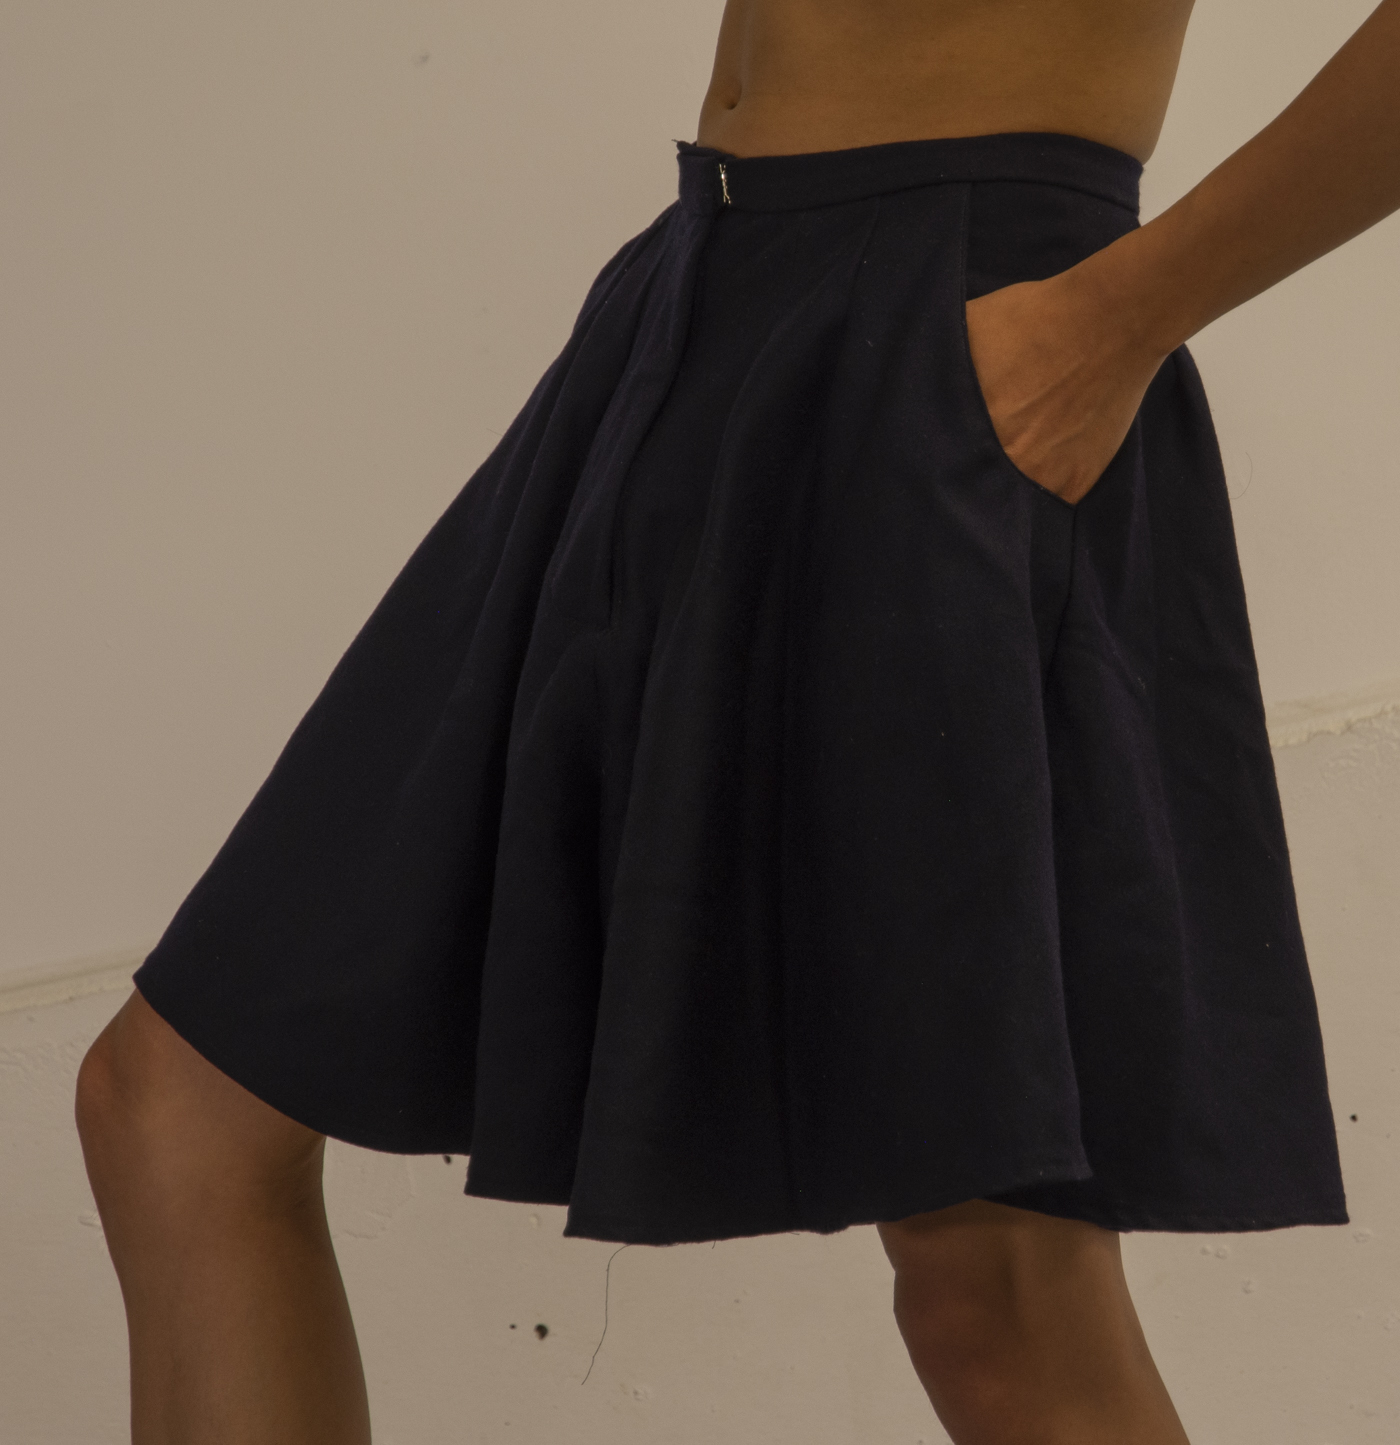 A close-up image of the artist wearing short culottes. Their hand reaches into one of the pockets.